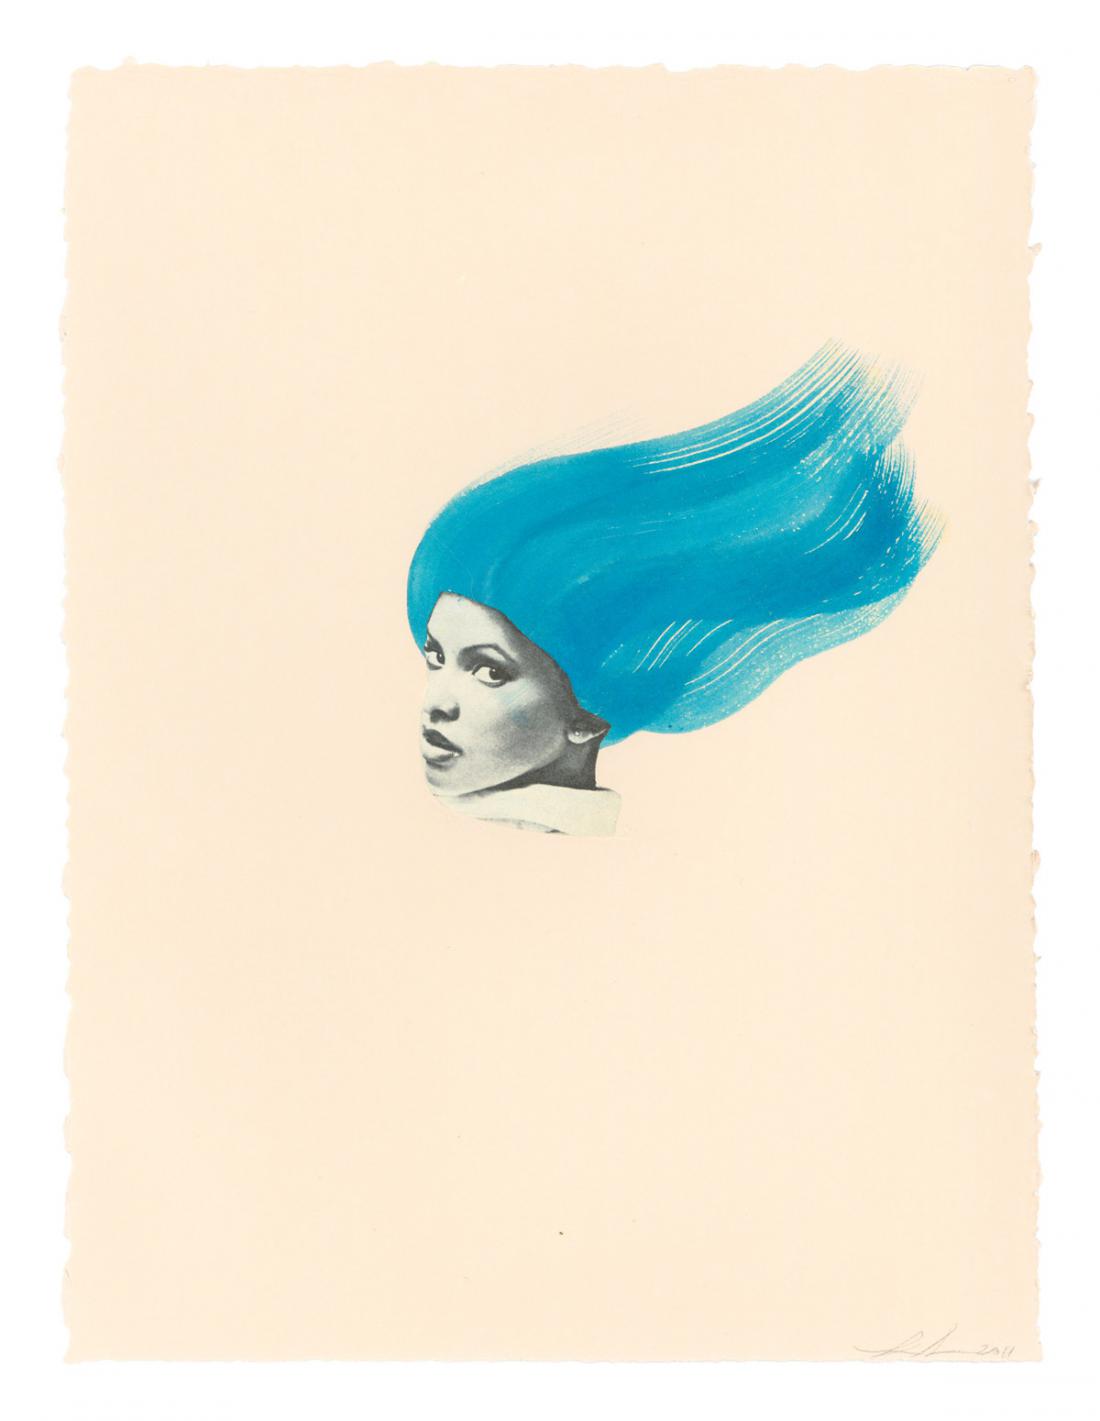  Lorna Simpson, Blue Wave, 2011. The Studio Museum in Harlem; gift of the artist on the occasion of the Romare Bearden (1911–1988) Centennial and the Bearden Project. © Lorna Simpson, courtesy the artist and Hauser &amp; Wirth 